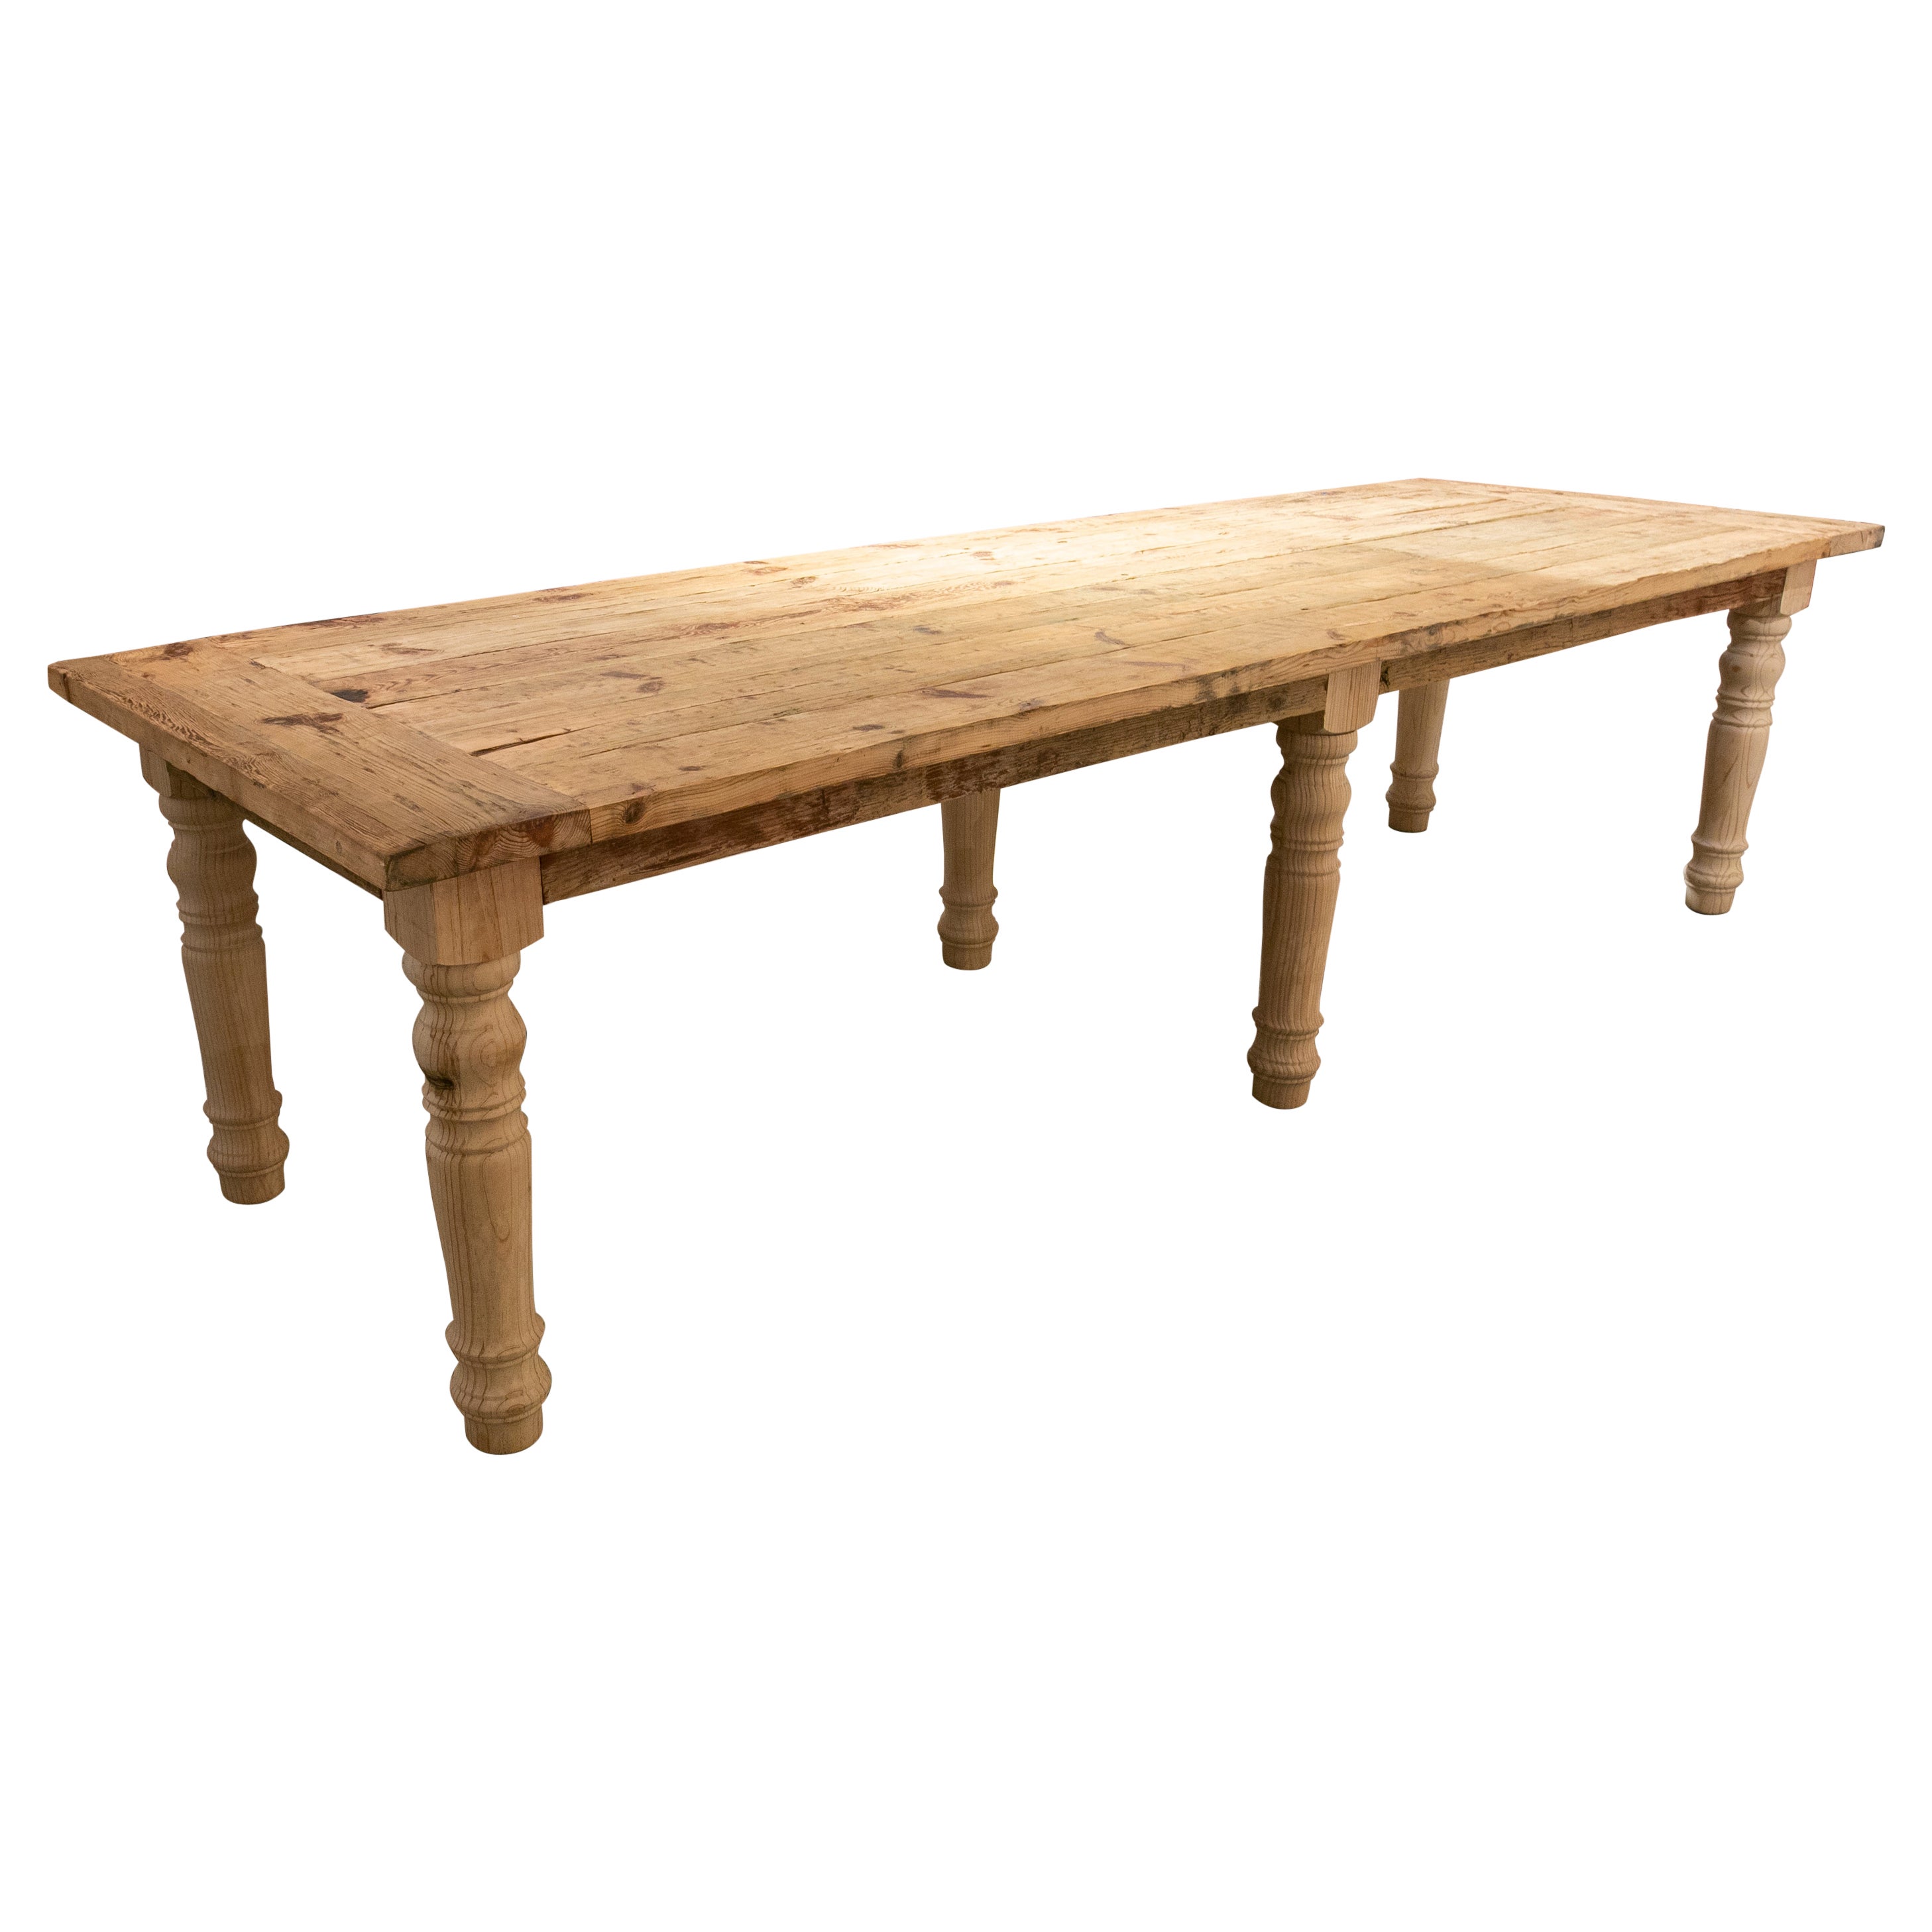 19th Century Country Table with Turned Reproduction Legs